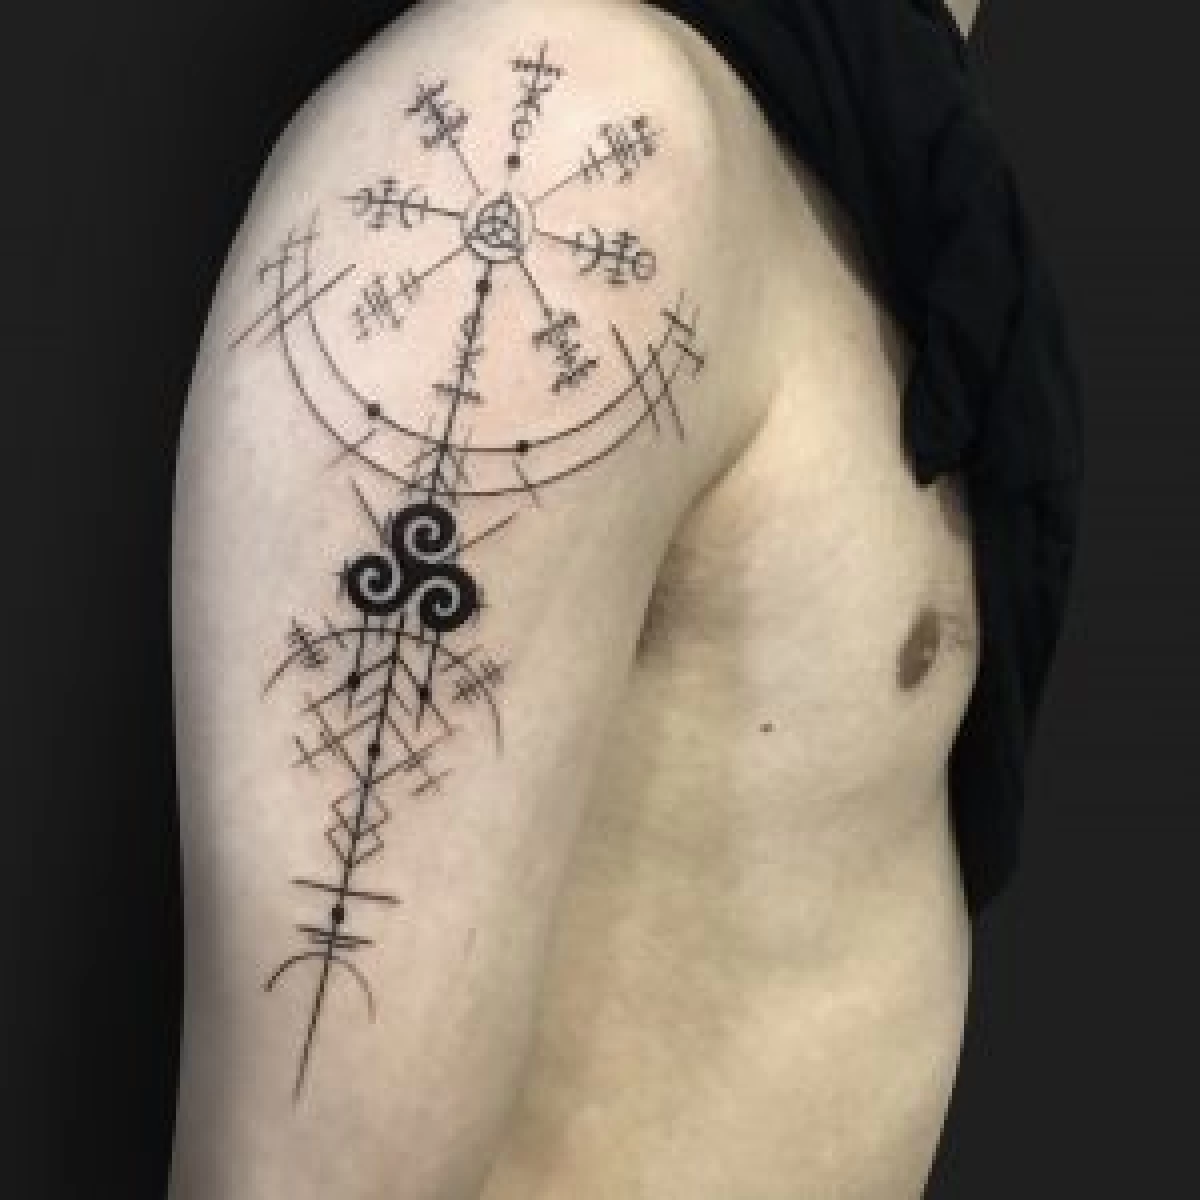 Your guide to Irish & Celtic Tattoos - The Black Hat Tattoo